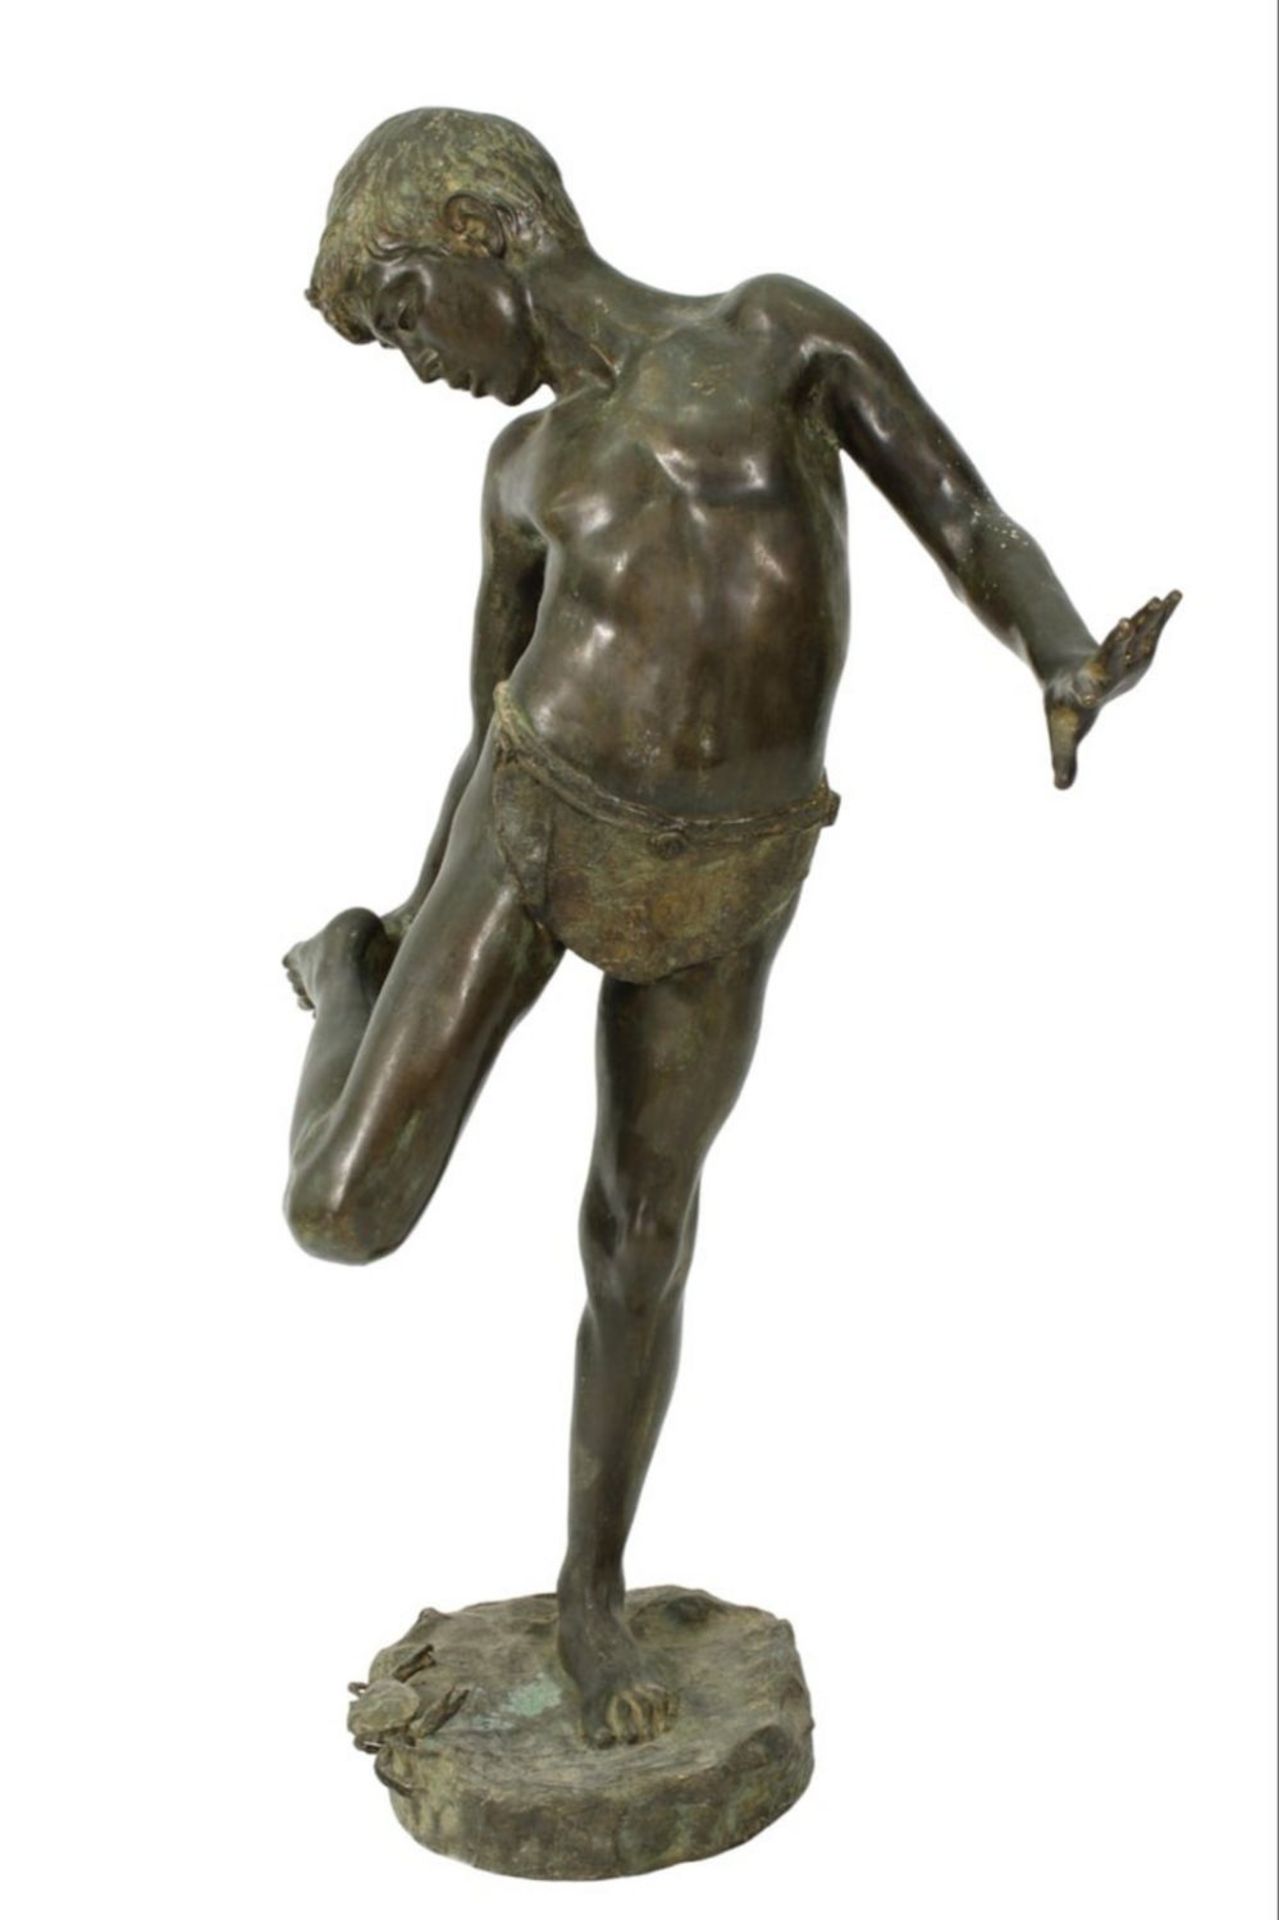 "Boy with Crab", attributed to Annibale de Lotto (1877 - 1932), large sculpture in patinated bronze,